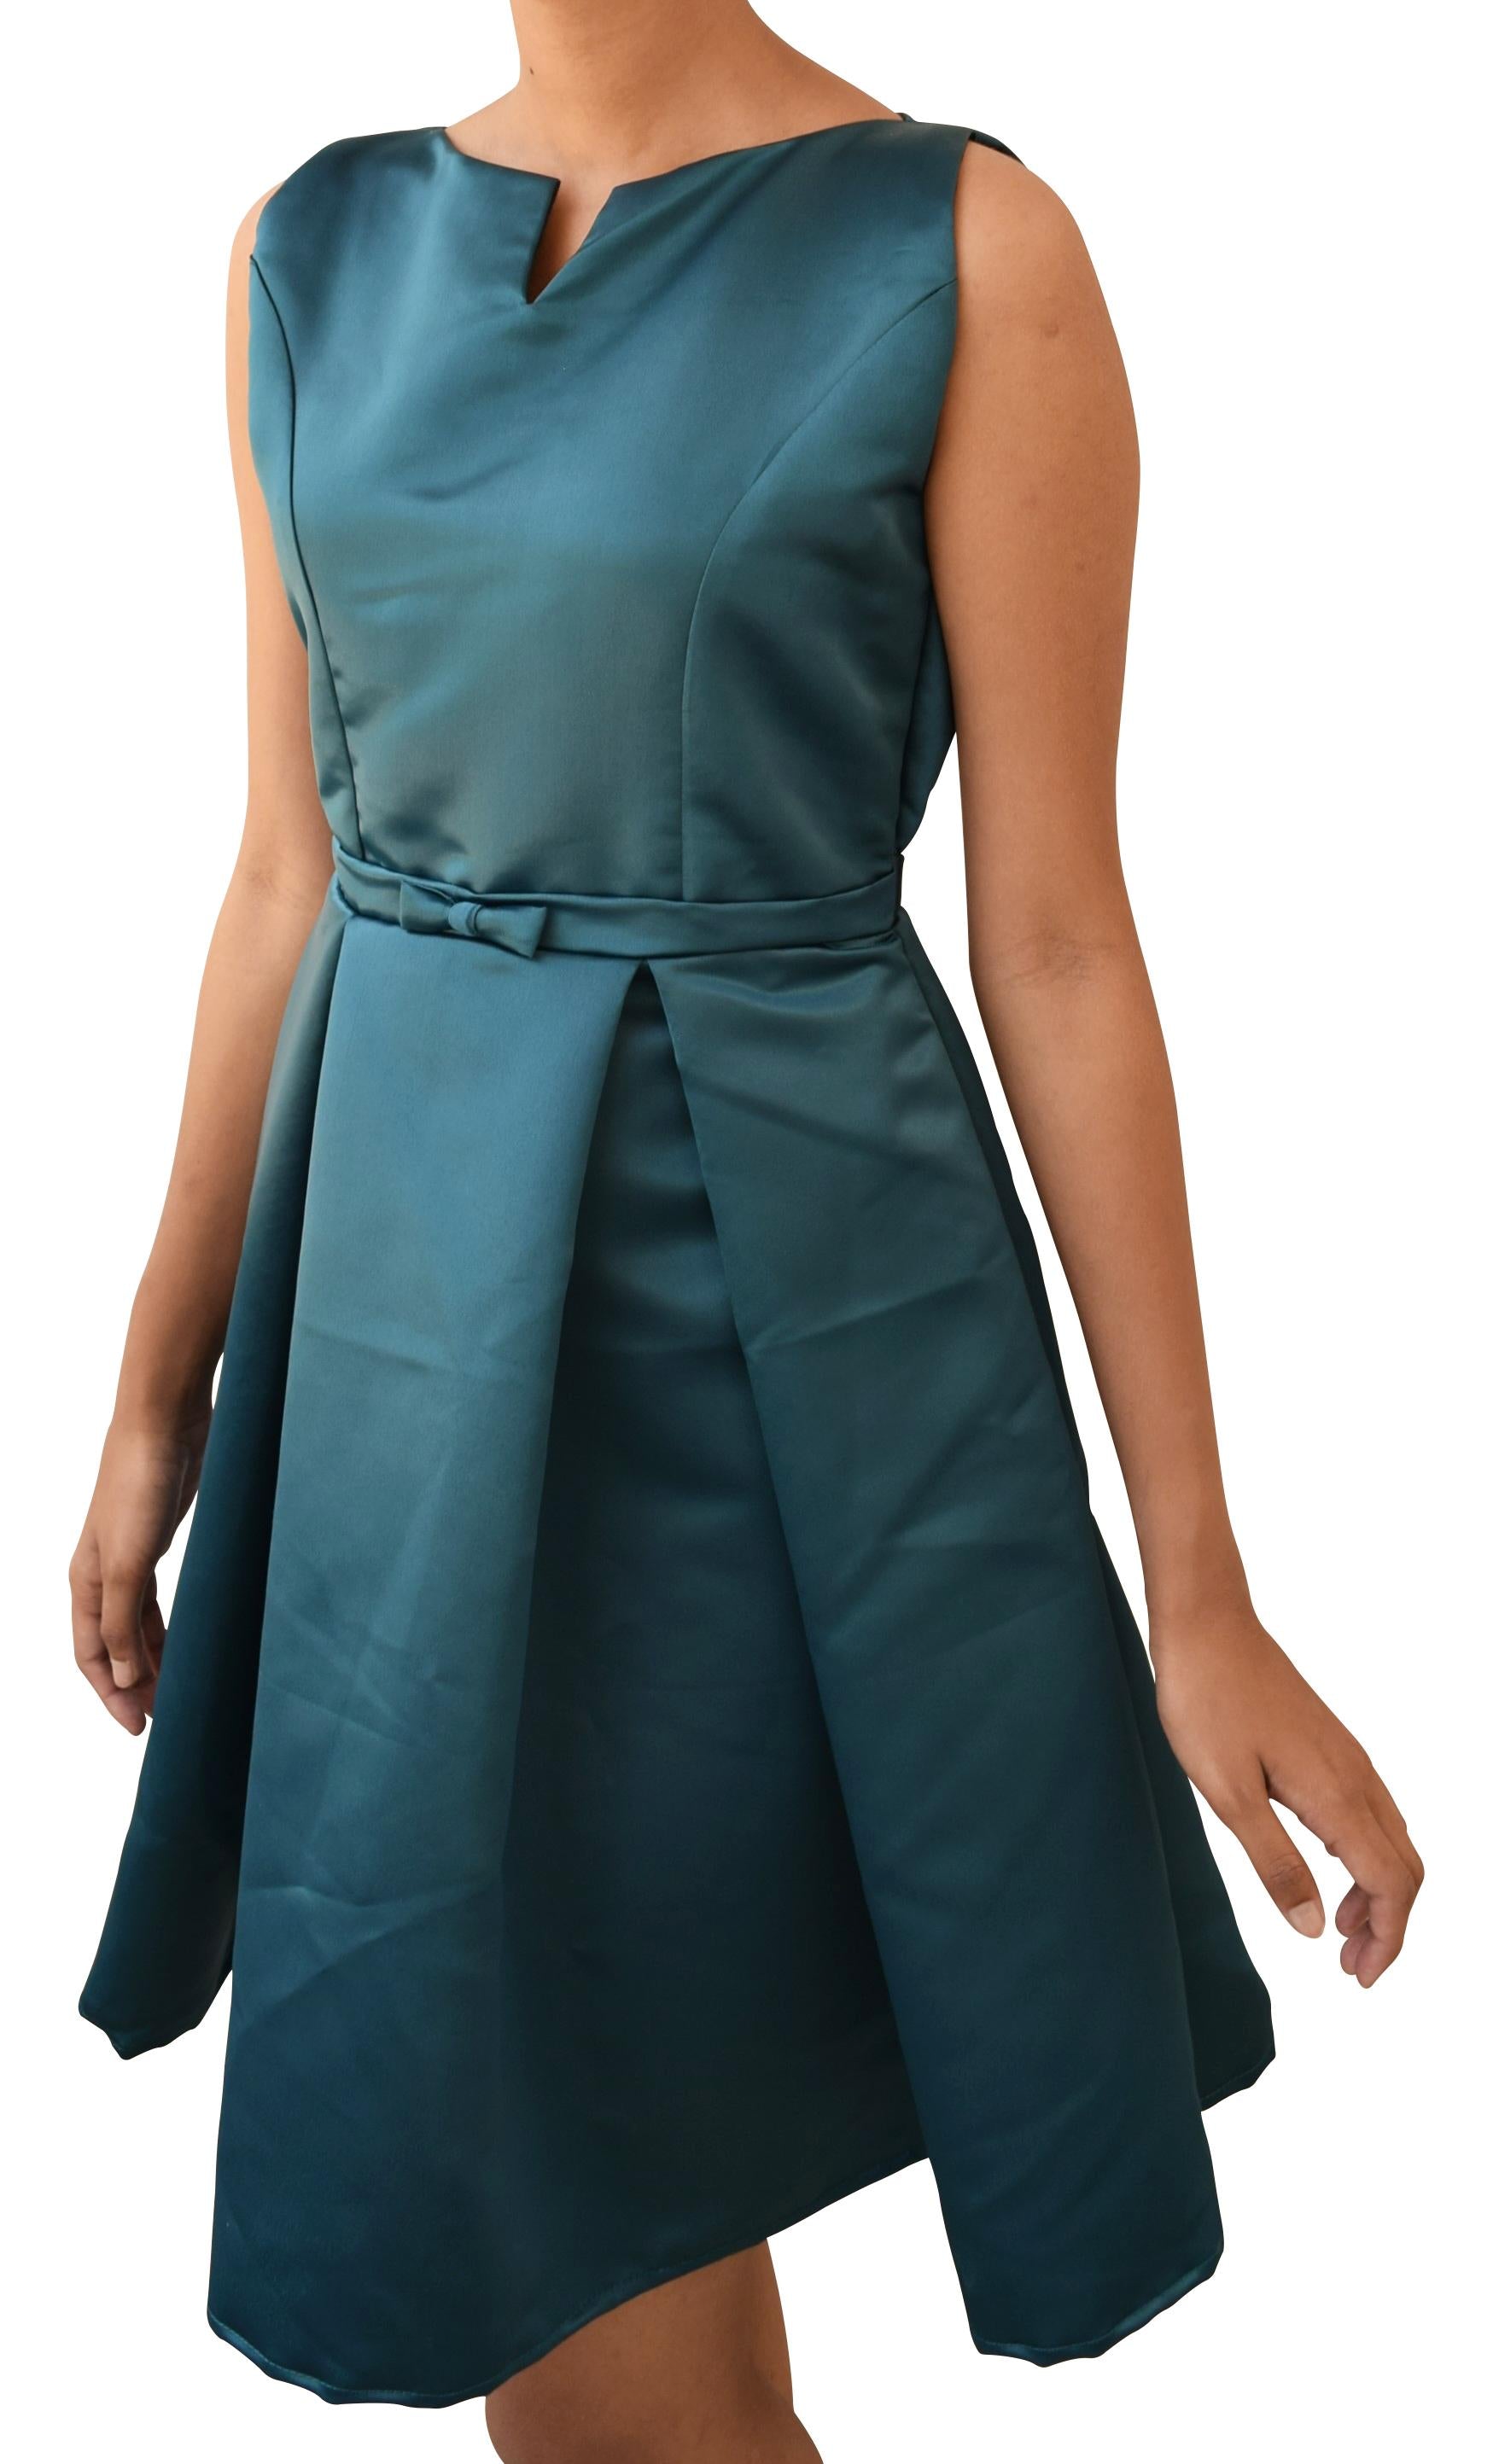 Teal Green Pleated Dress for Teen Girls